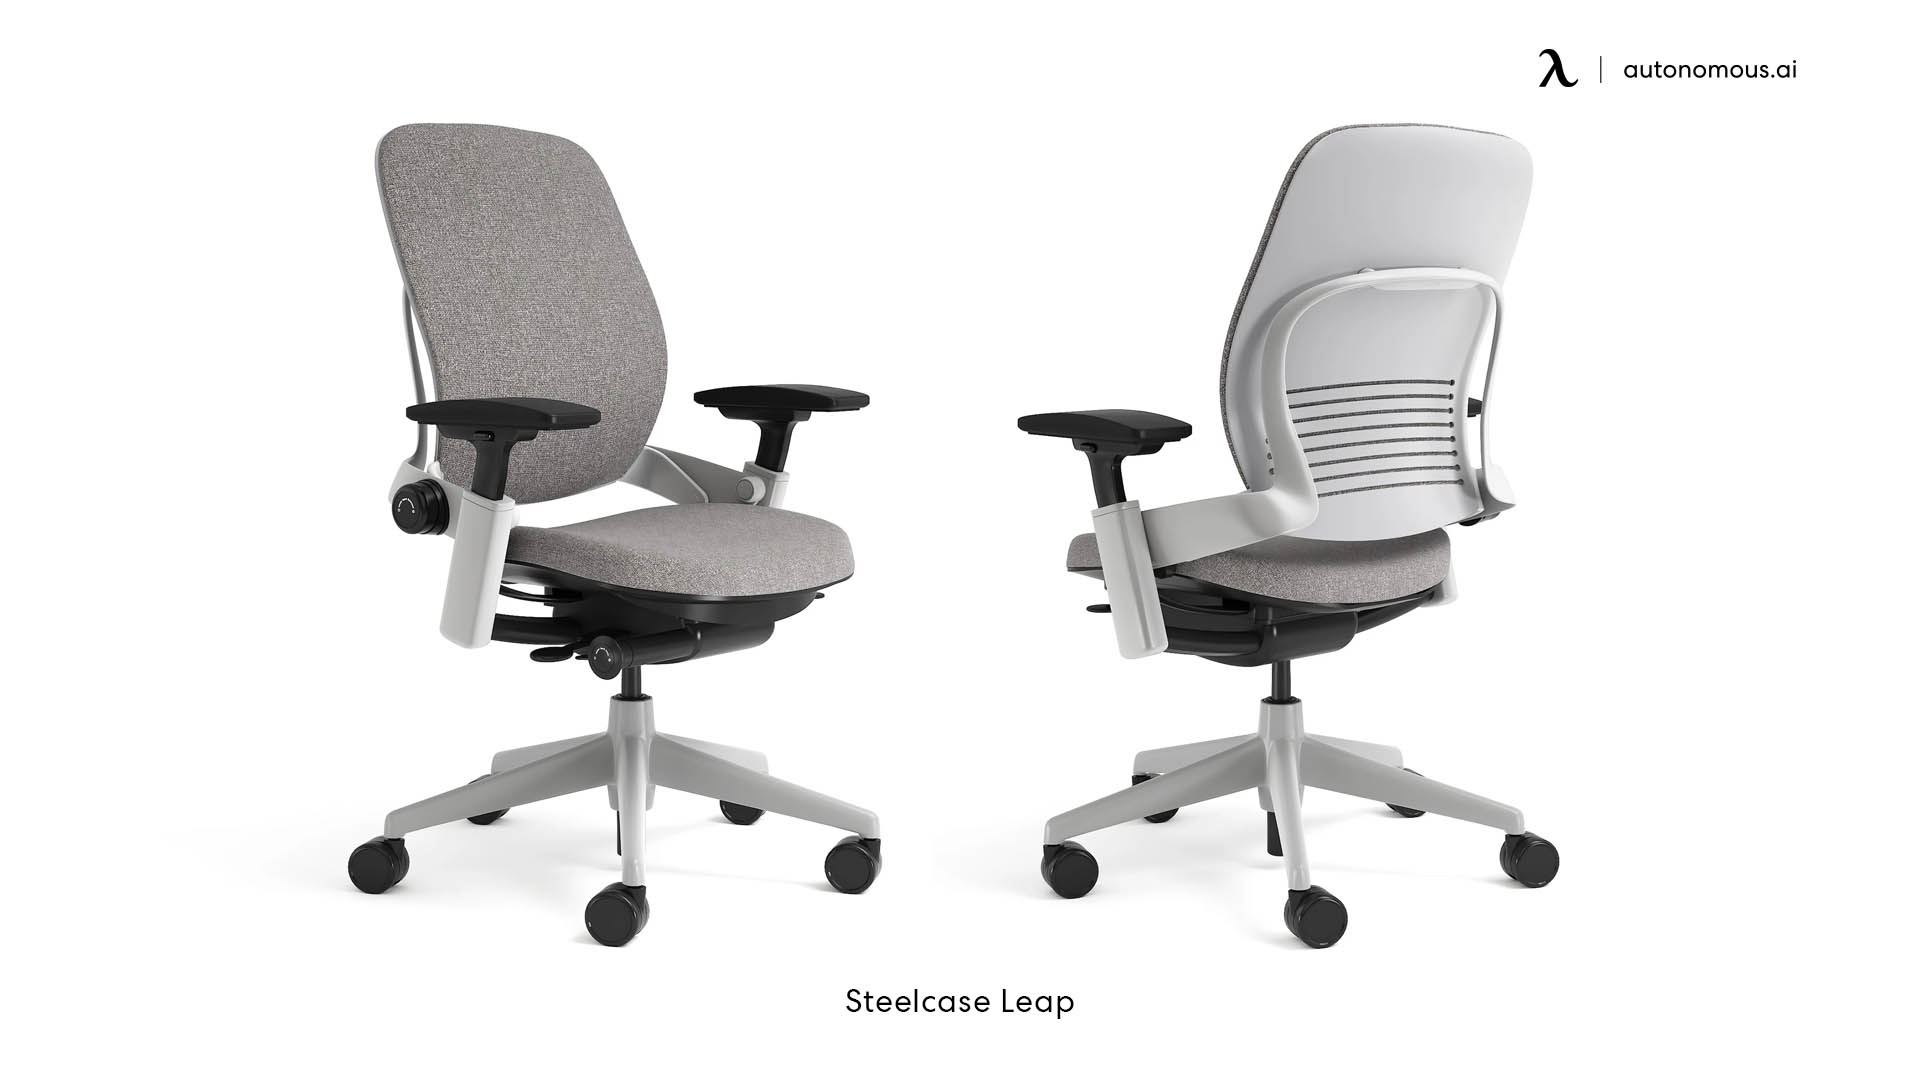 Leap Fabric plush office chair by Steelcase